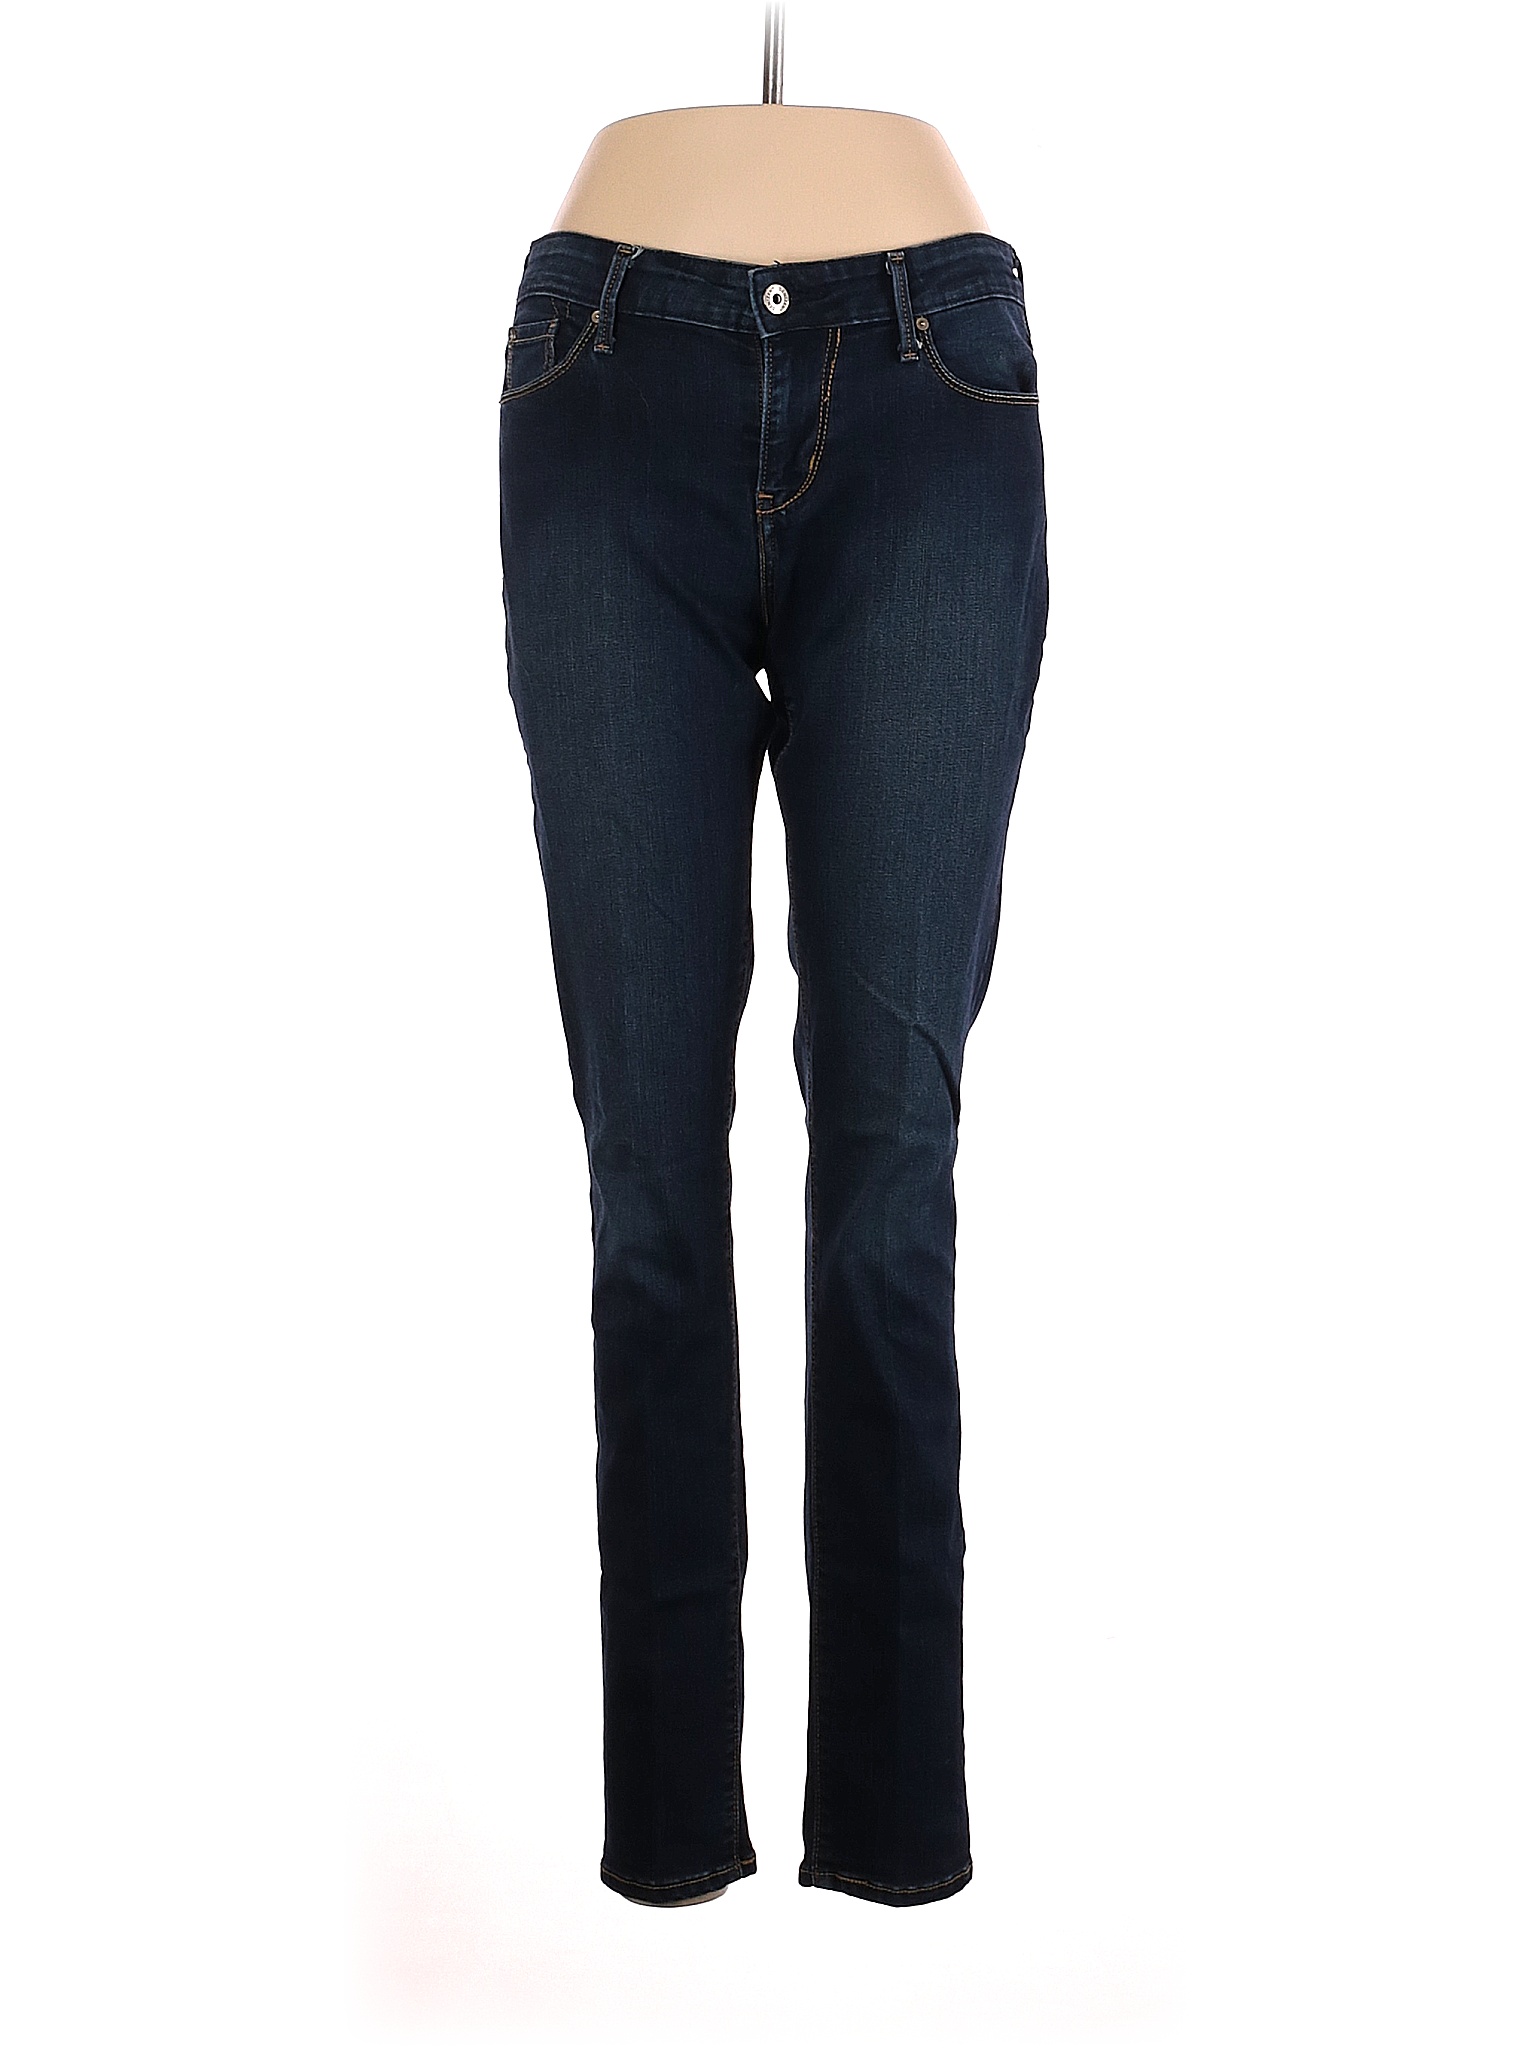 Denizen from Levi's Solid Blue Jeans Size 6 - 60% off | thredUP